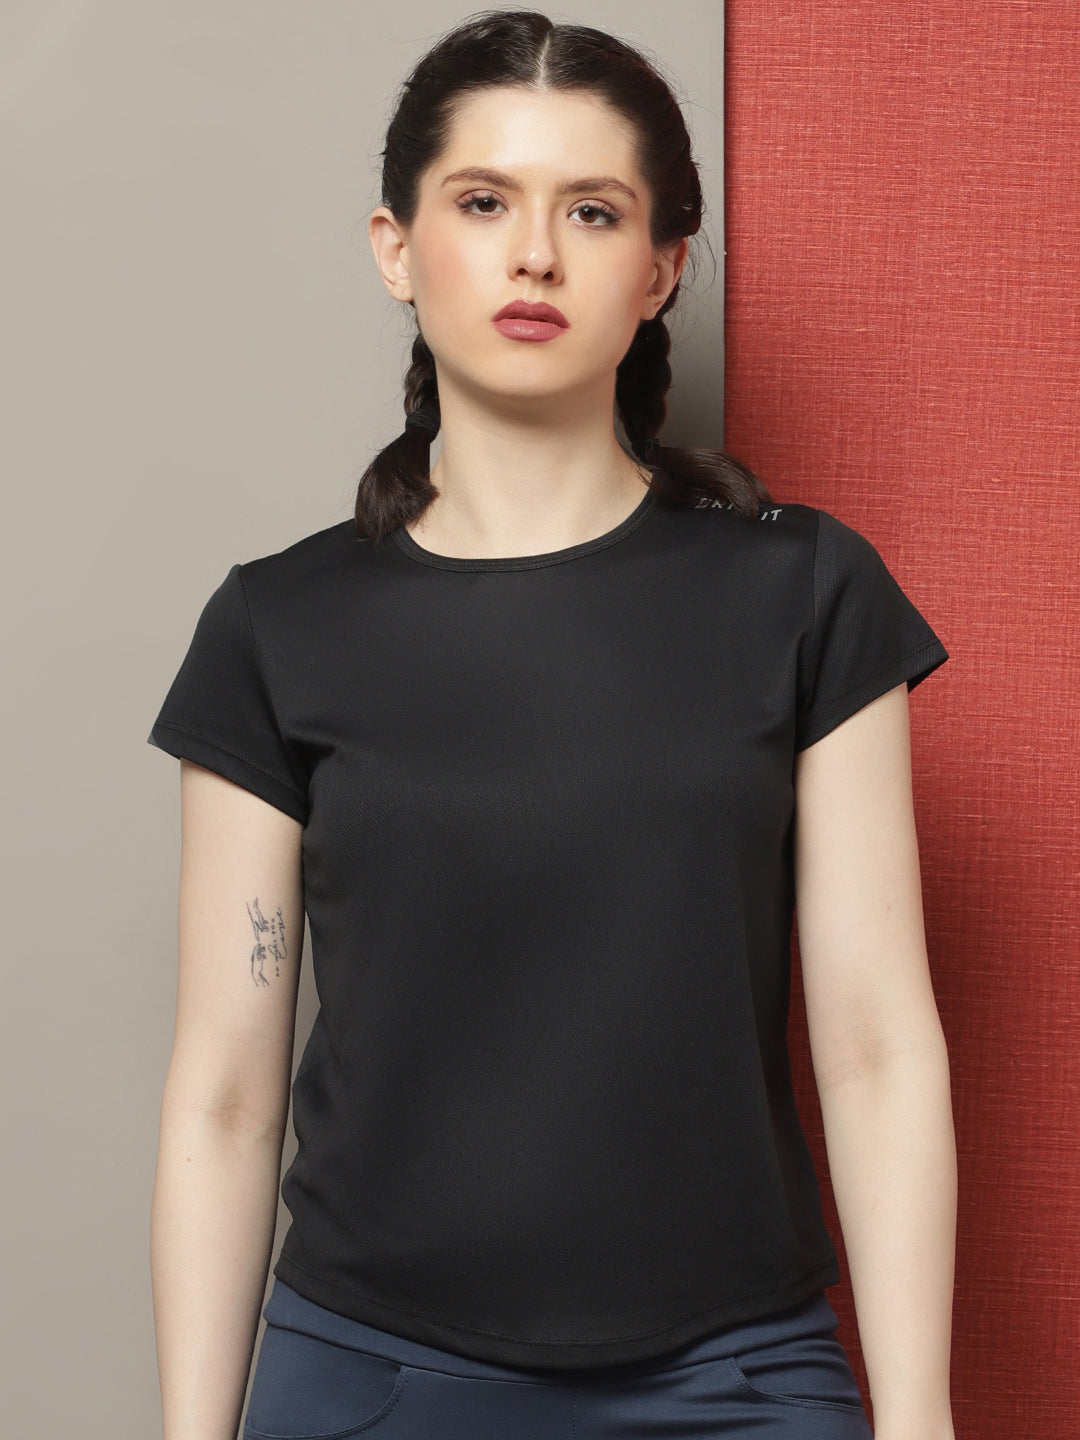 Women's Short Sleeves Cut outs Slim Fit Running T-shirt - Friskers